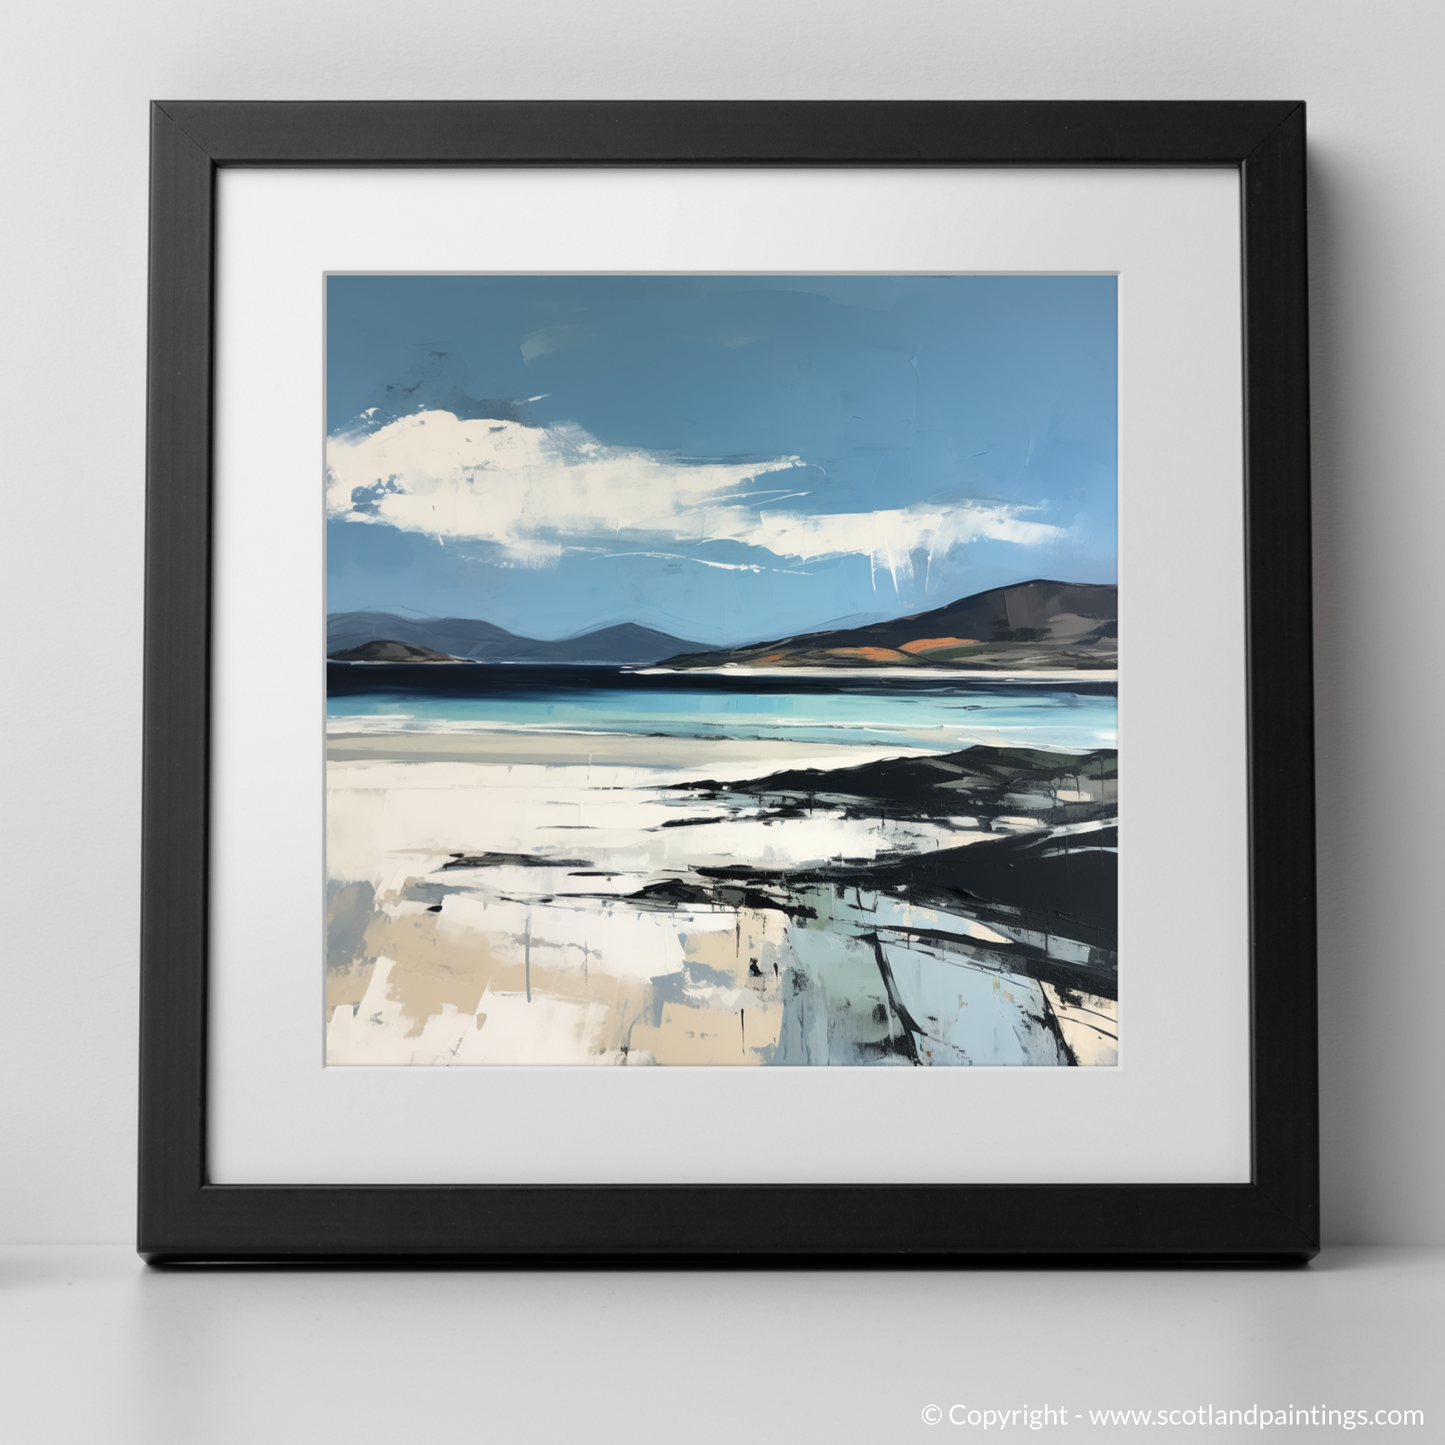 Art Print of Luskentyre Sands on the Isle of Harris with a black frame